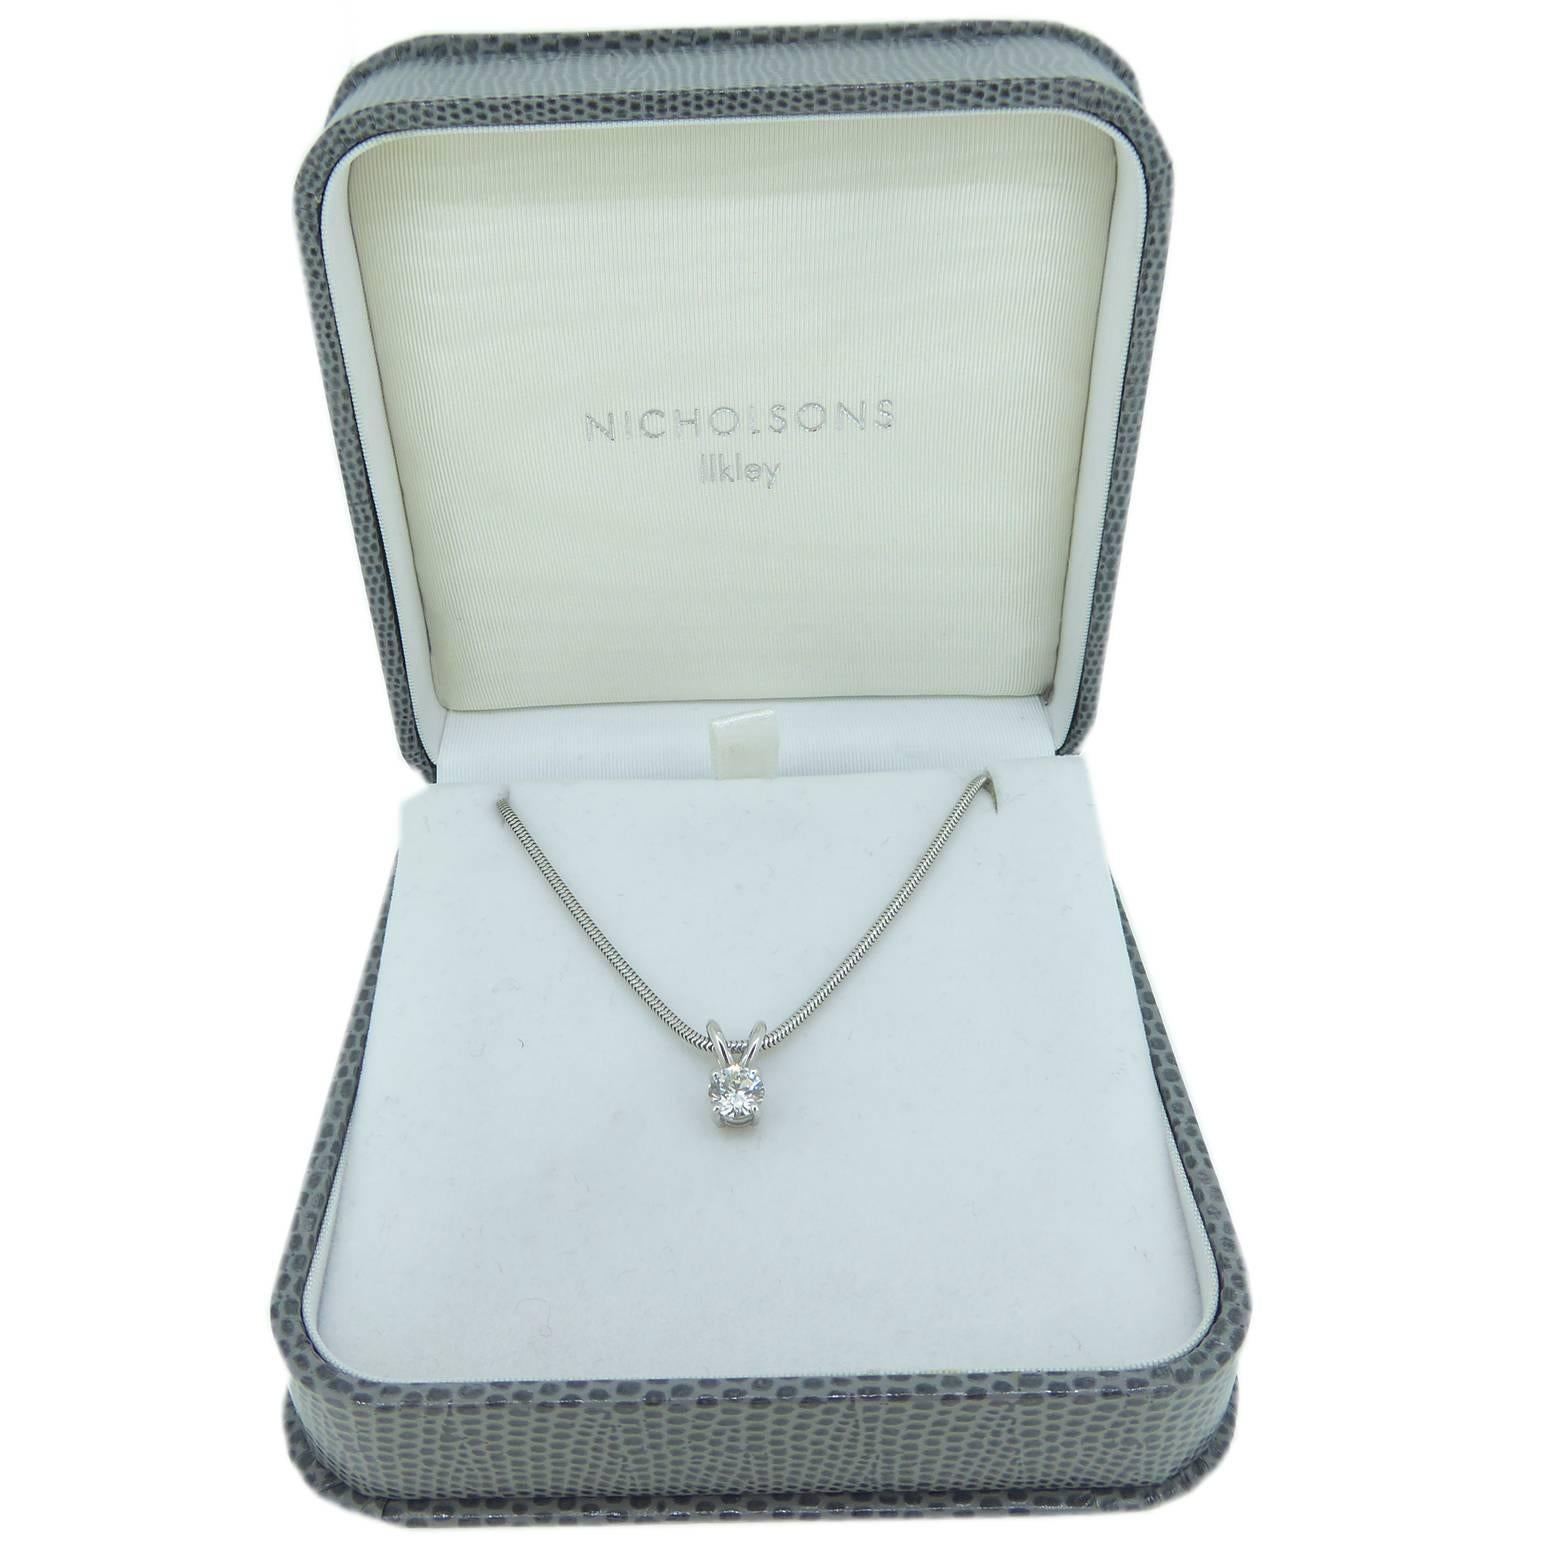 Contemporary Vintage 0.65 Carat Diamond Solitaire Necklace with 18 Carat White Gold Chain